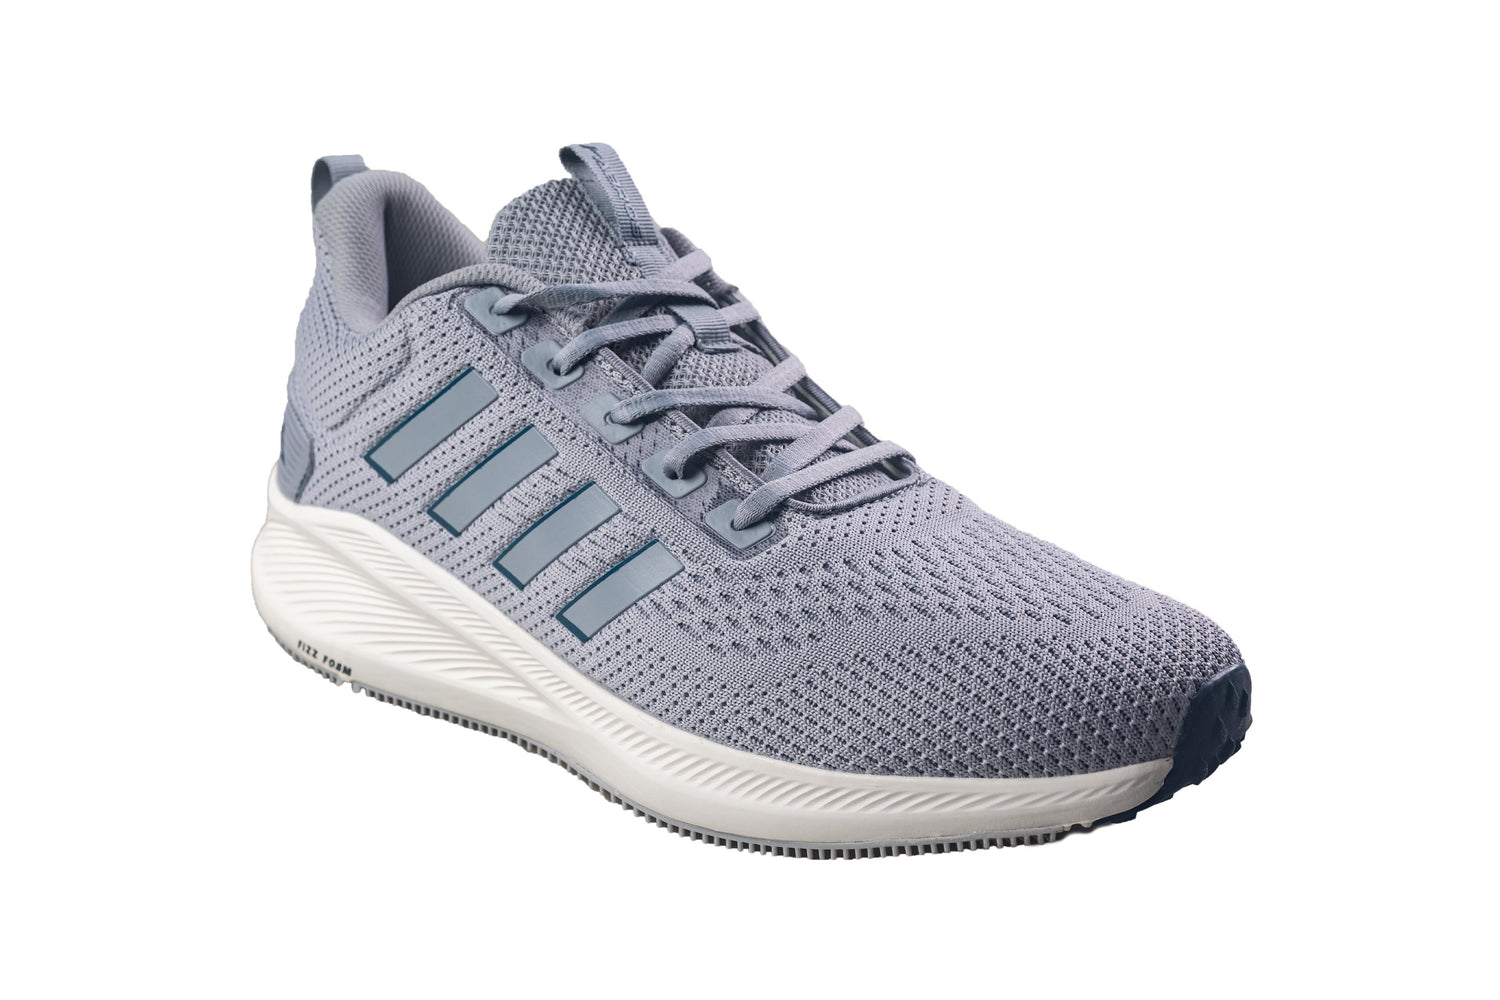 Abros Gents L. Grey / Teal Sports Shoe